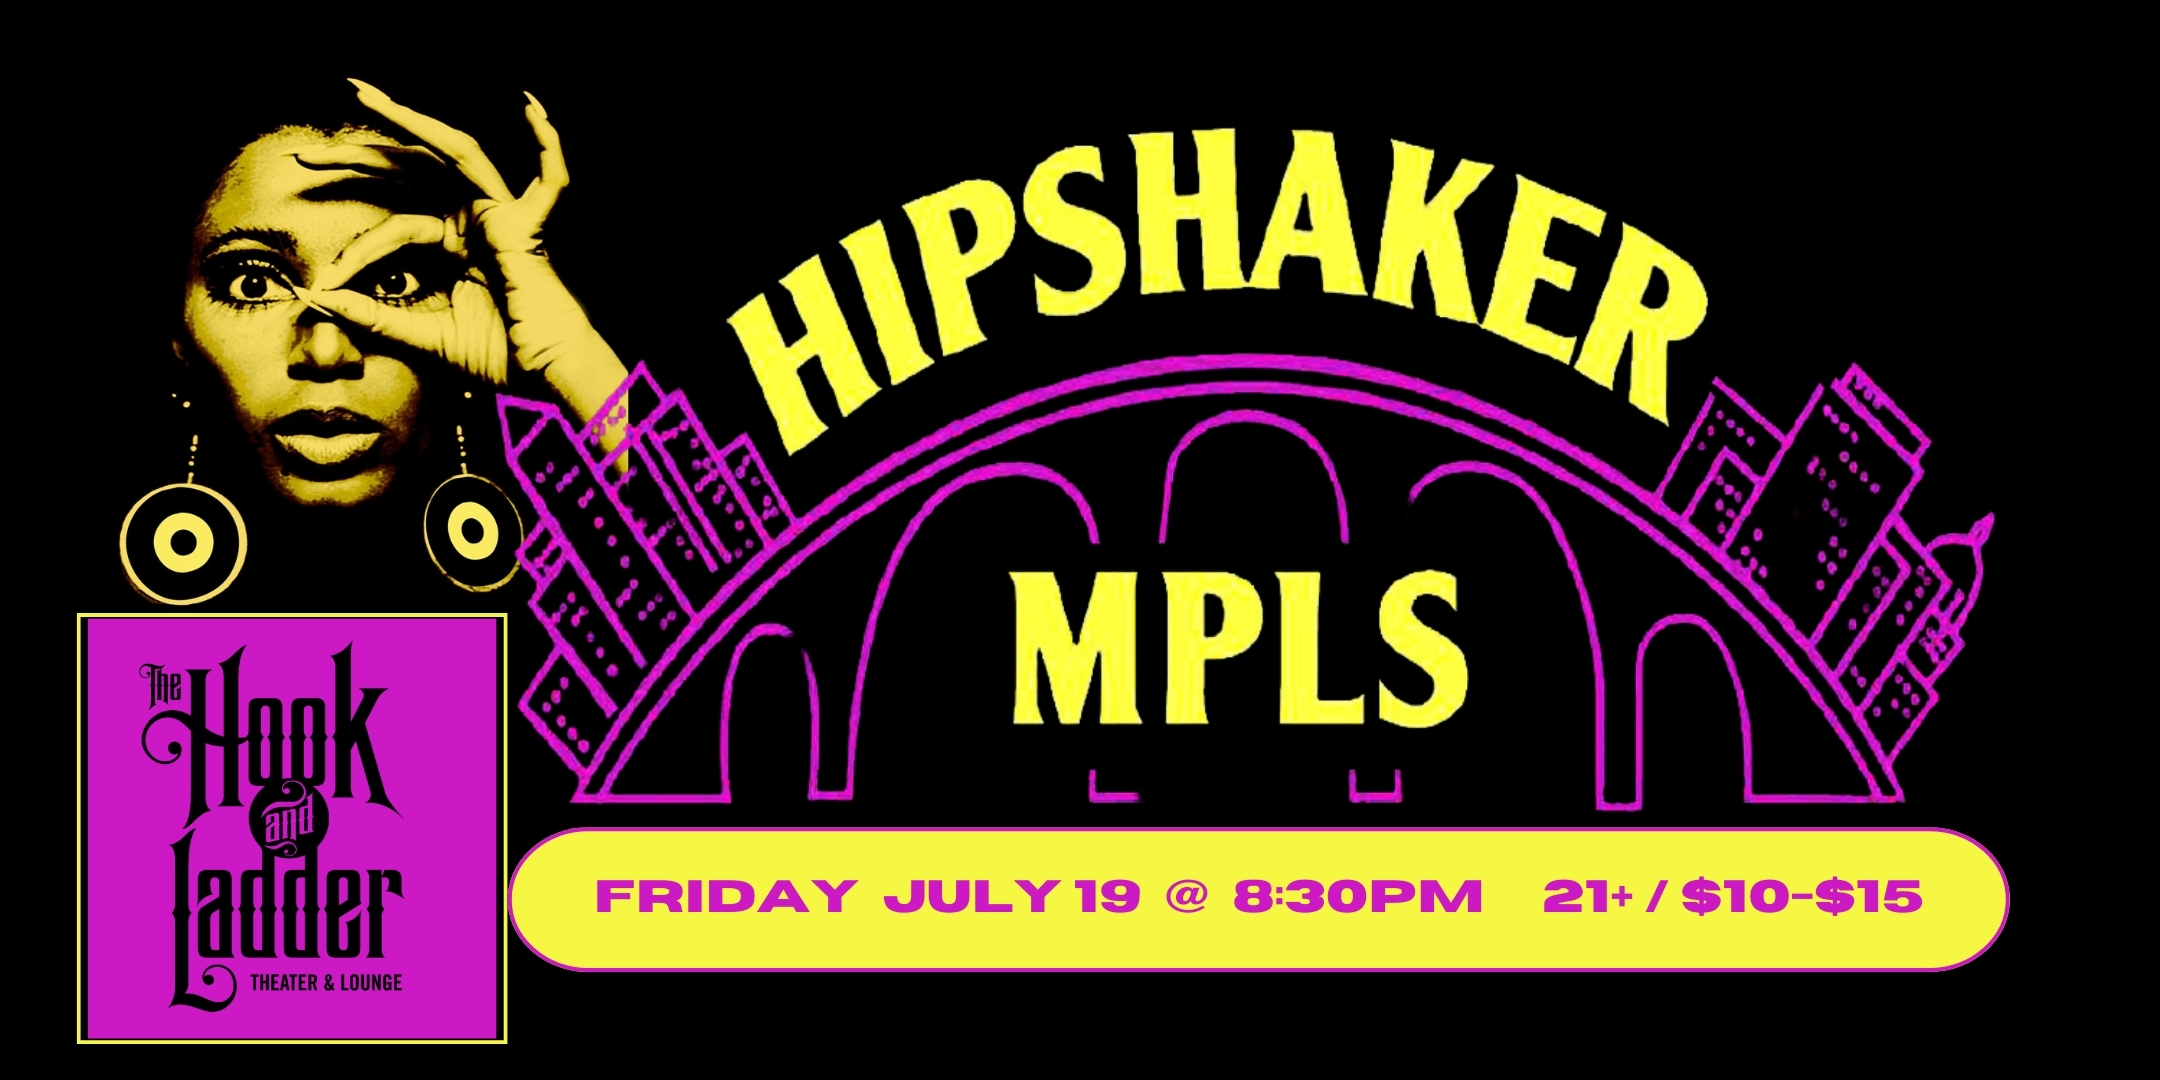 Hipshaker MPLS Heavy Funk & Rare Soul Dance Party Original Vinyl 45s! DJs Brian Engel, Greg Waletski, George Rodriguez Friday, July 19 The Hook and Ladder Theater Doors 8:30pm :: Music 8:30pm :: 21+ GA $10 ADV / $15 DOS NO REFUNDS